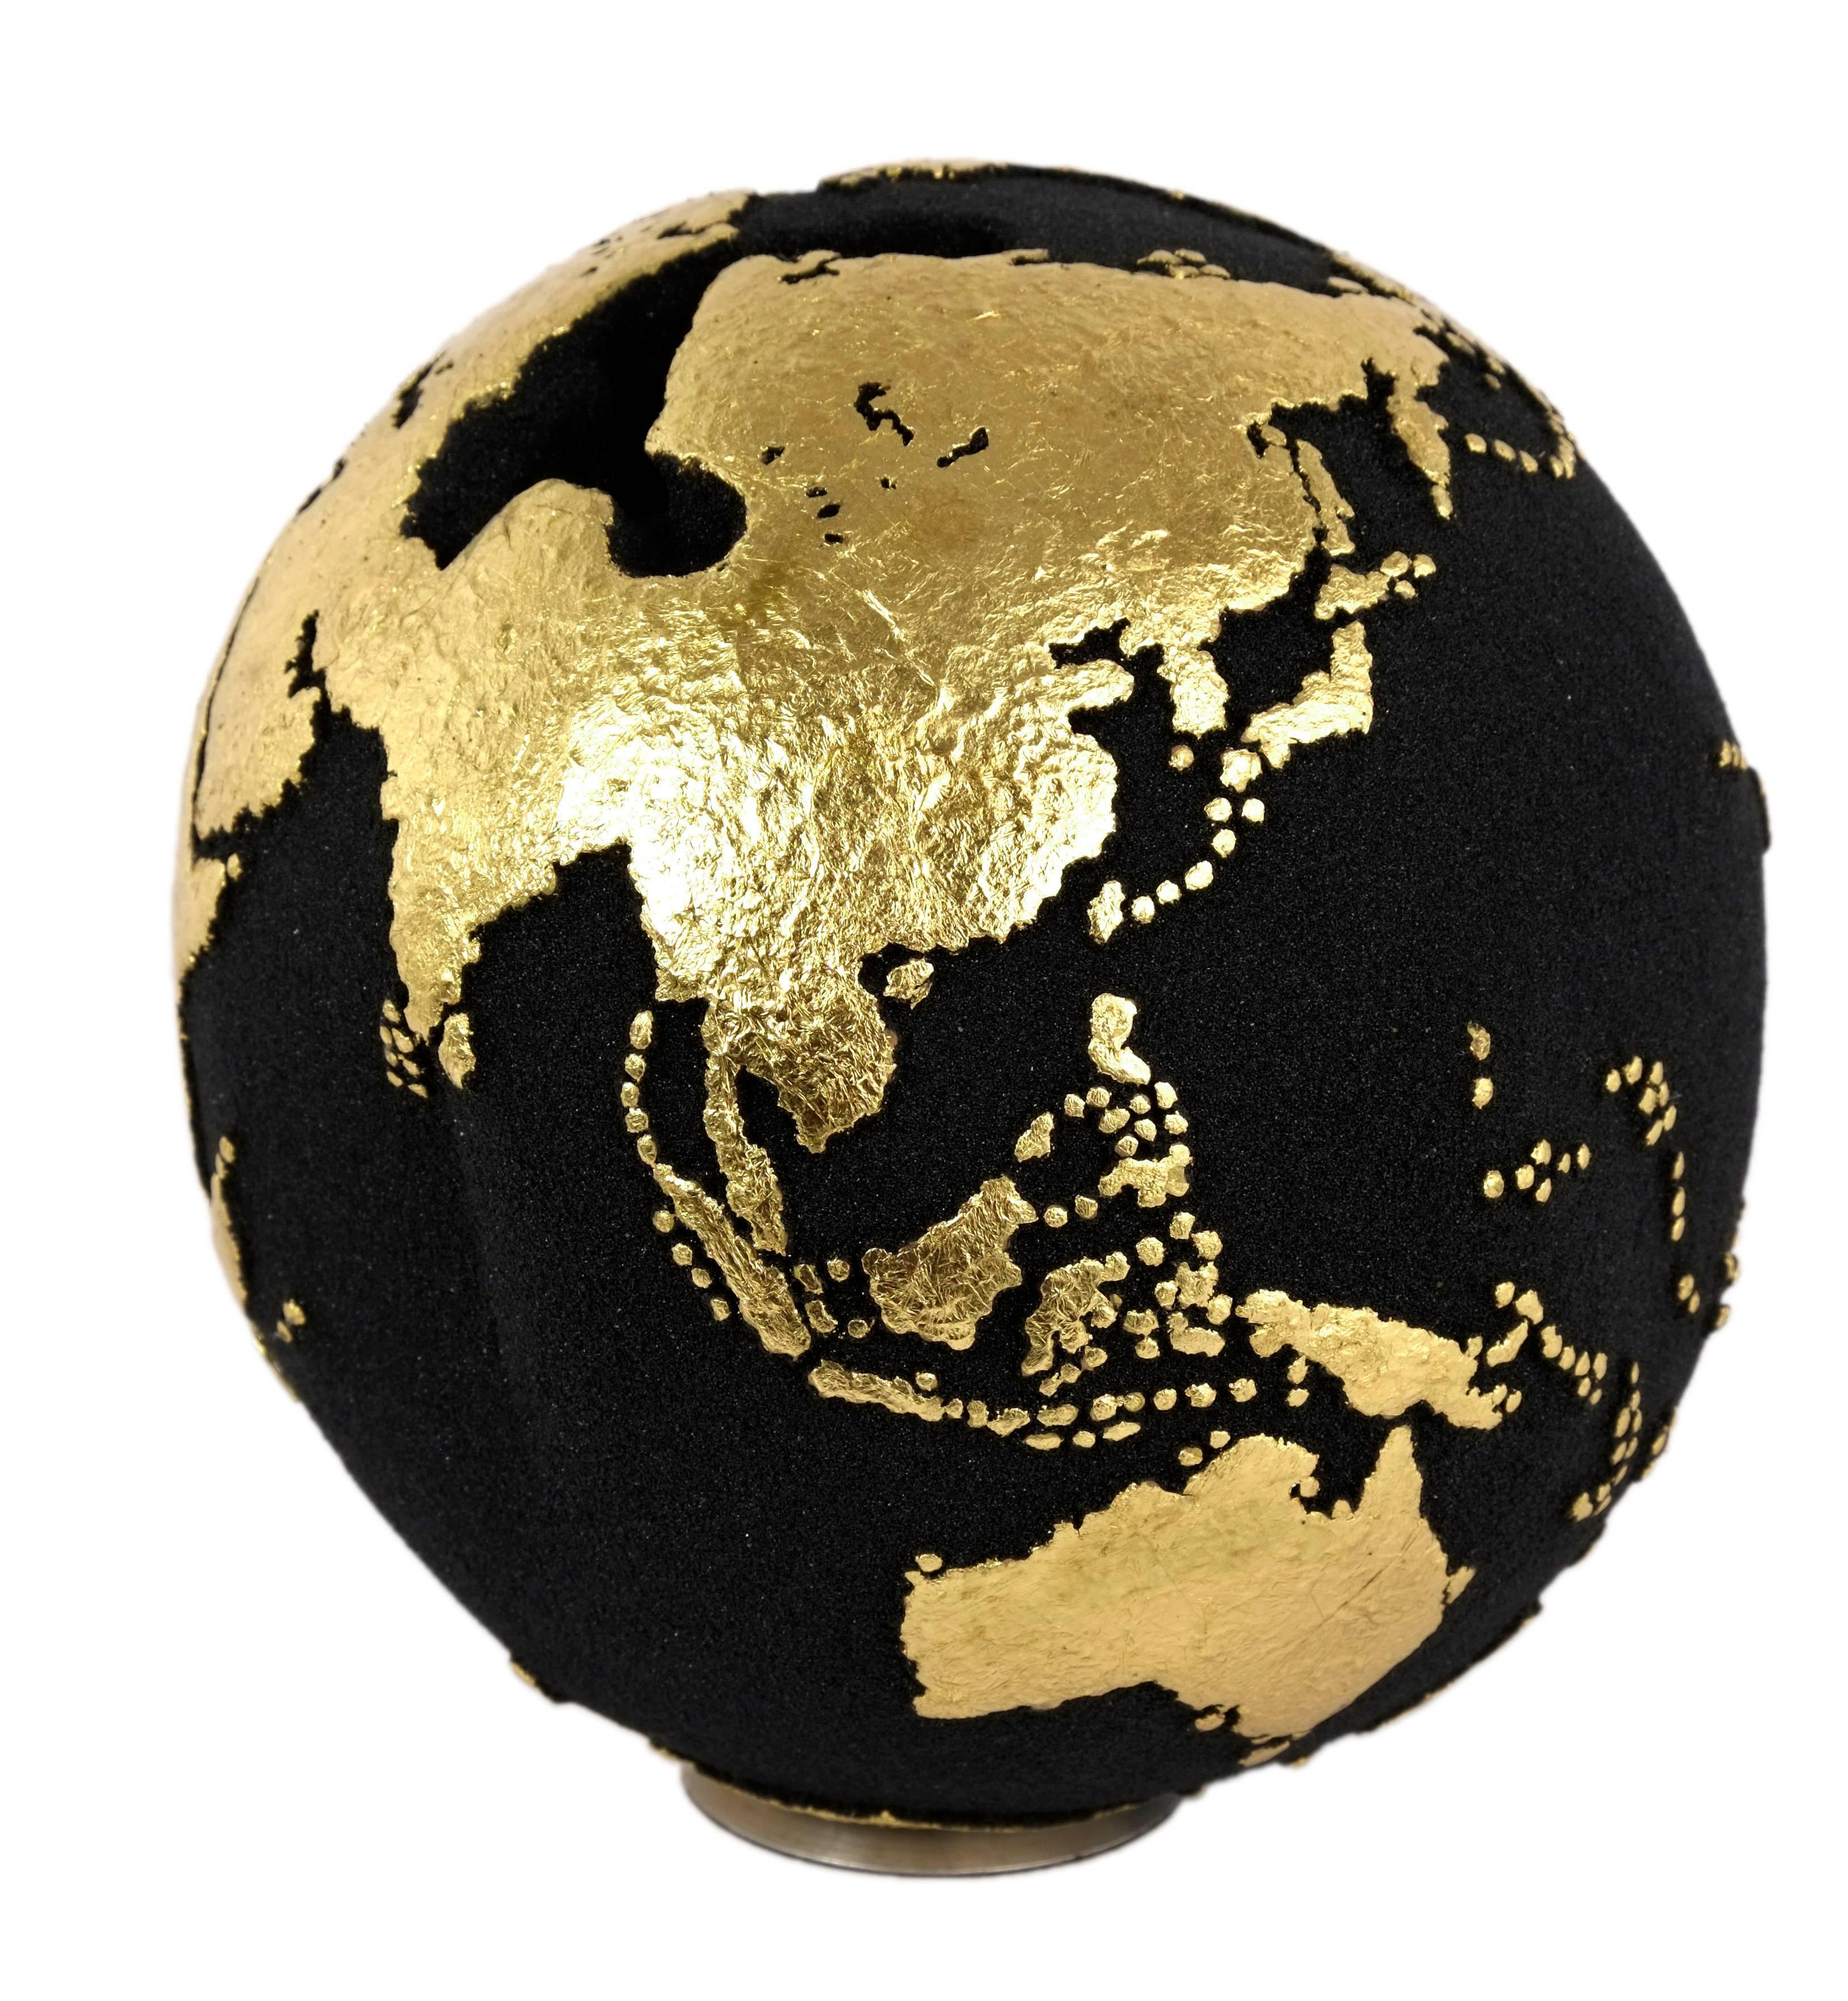 Organic Modern Classic Globe with Volcanic Sand and Gold Finishing, 20cm